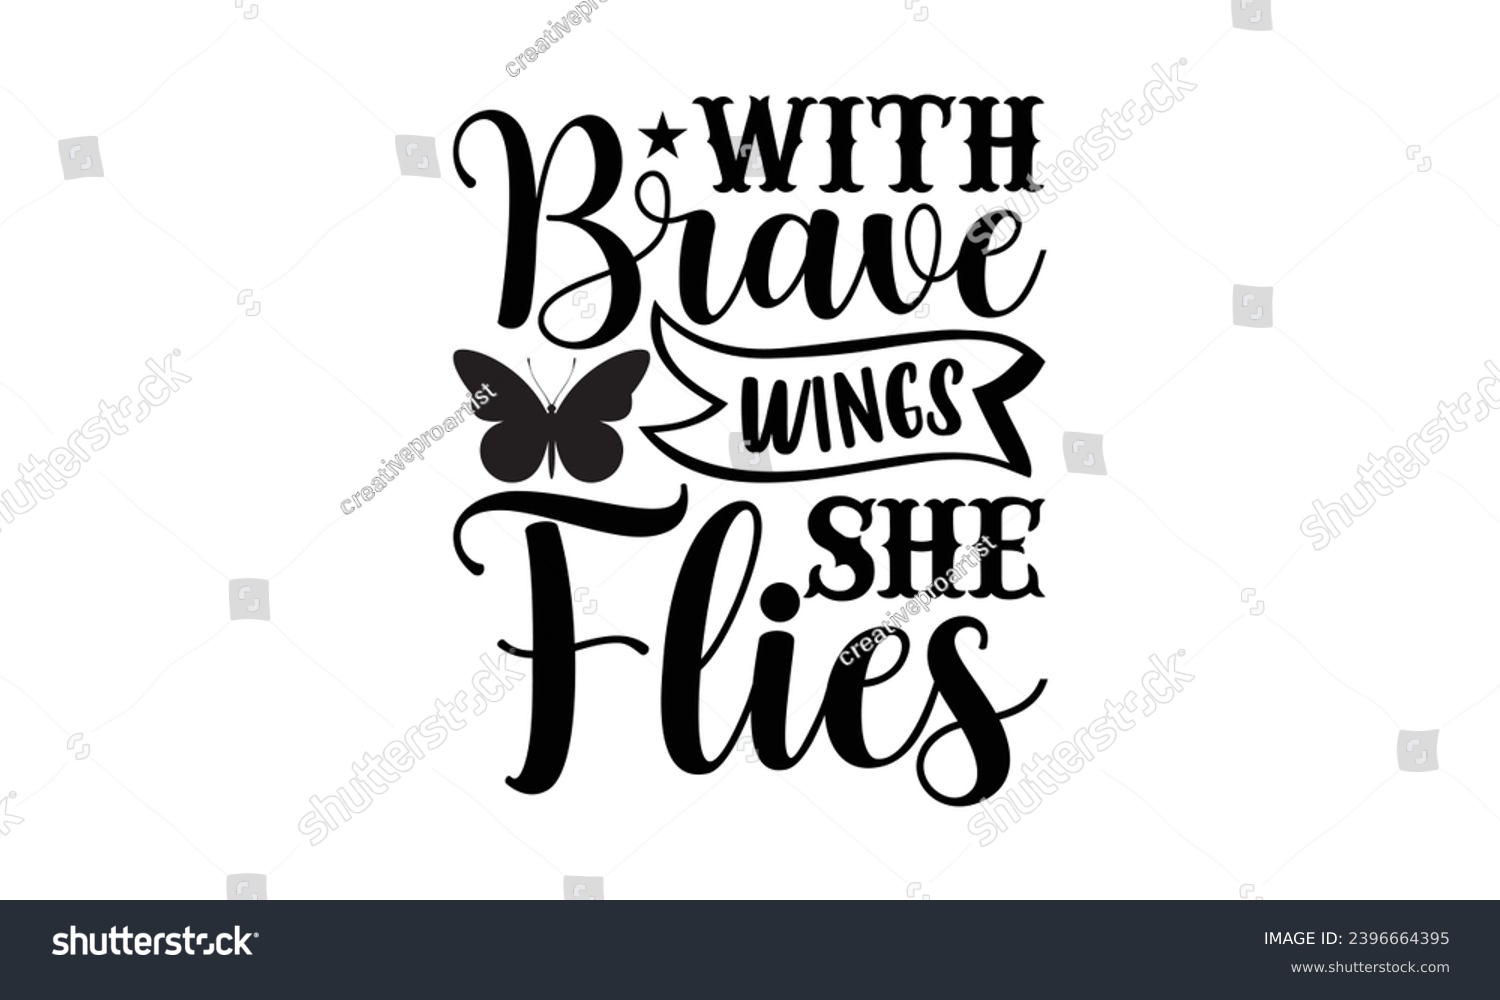 SVG of with brave wings she flies- Butterfly t- shirt design, Handmade calligraphy vector illustration for Cutting Machine, Silhouette Cameo, Cricut, Vector illustration Template eps svg